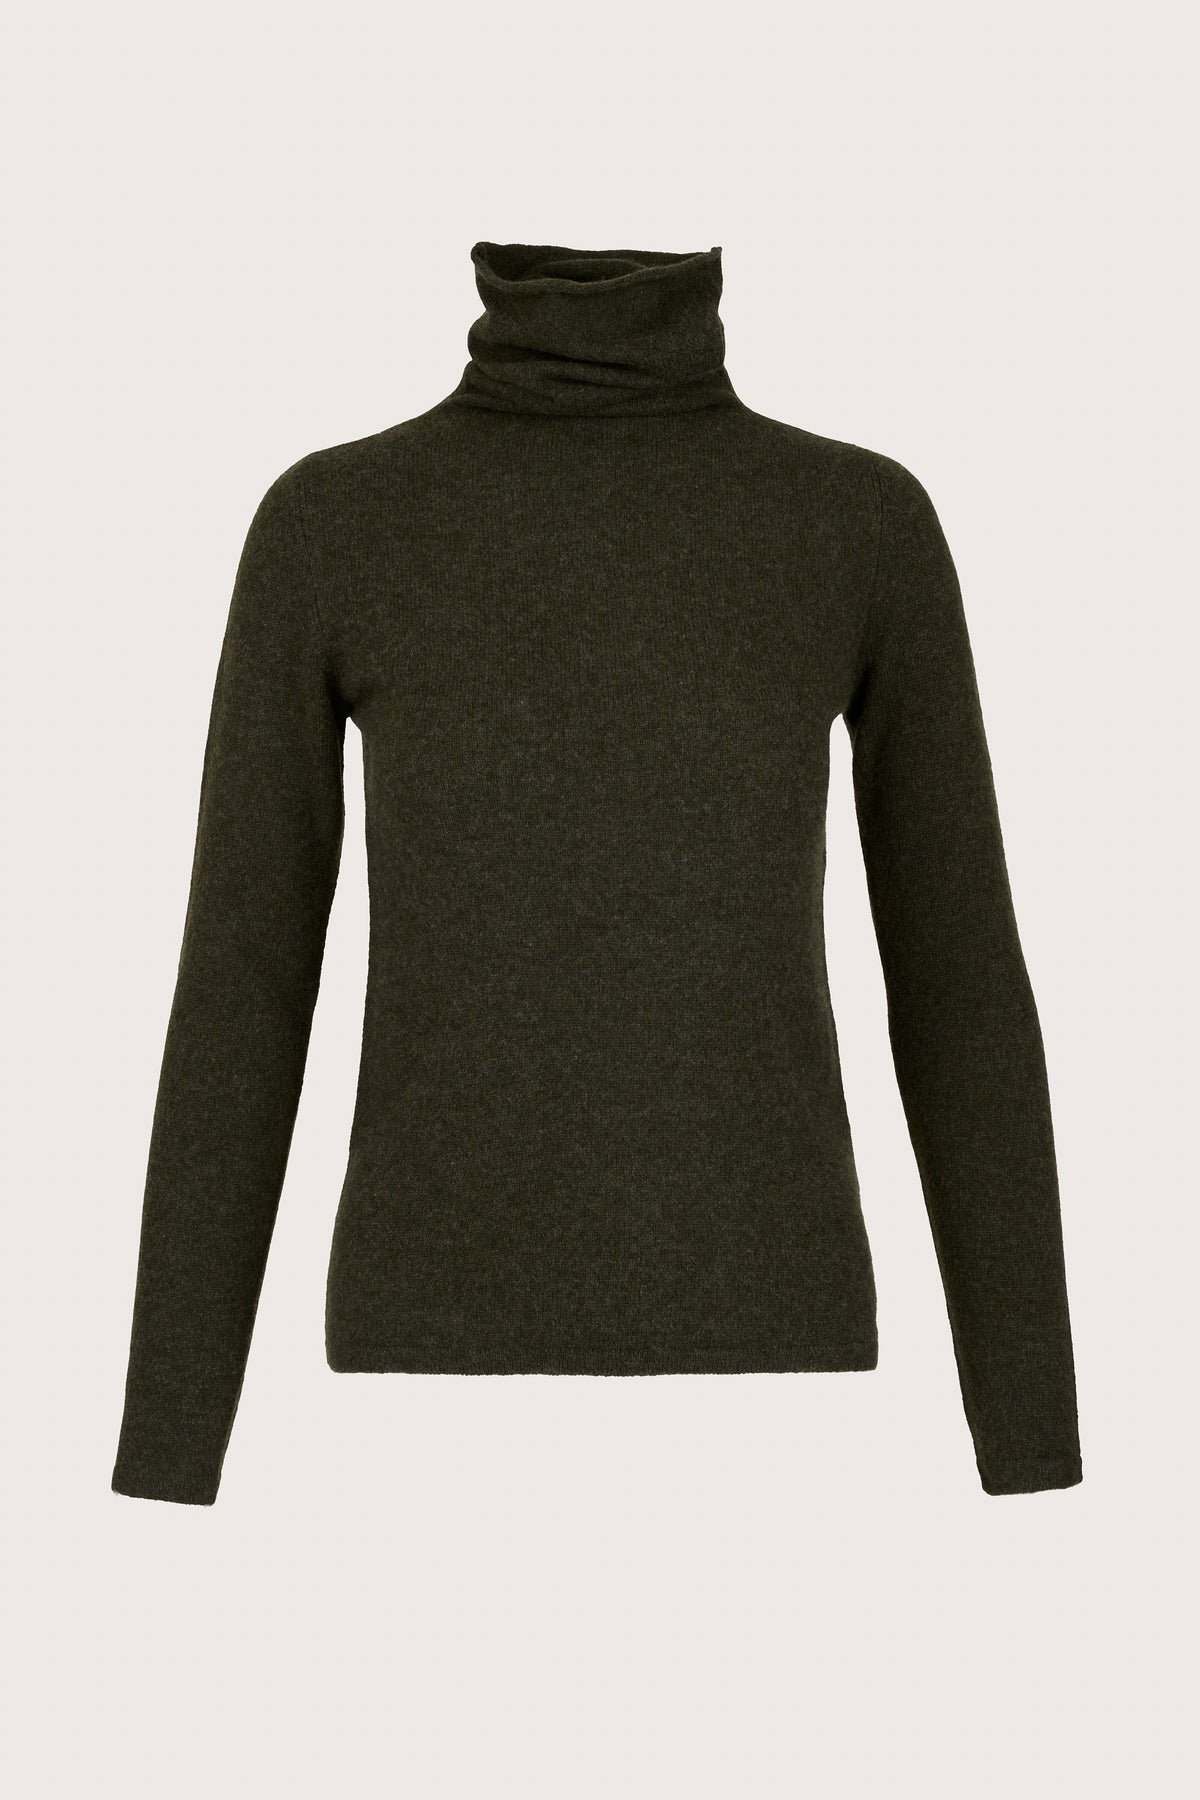 Cowl neck long sleeved cashmere jumper in khaki